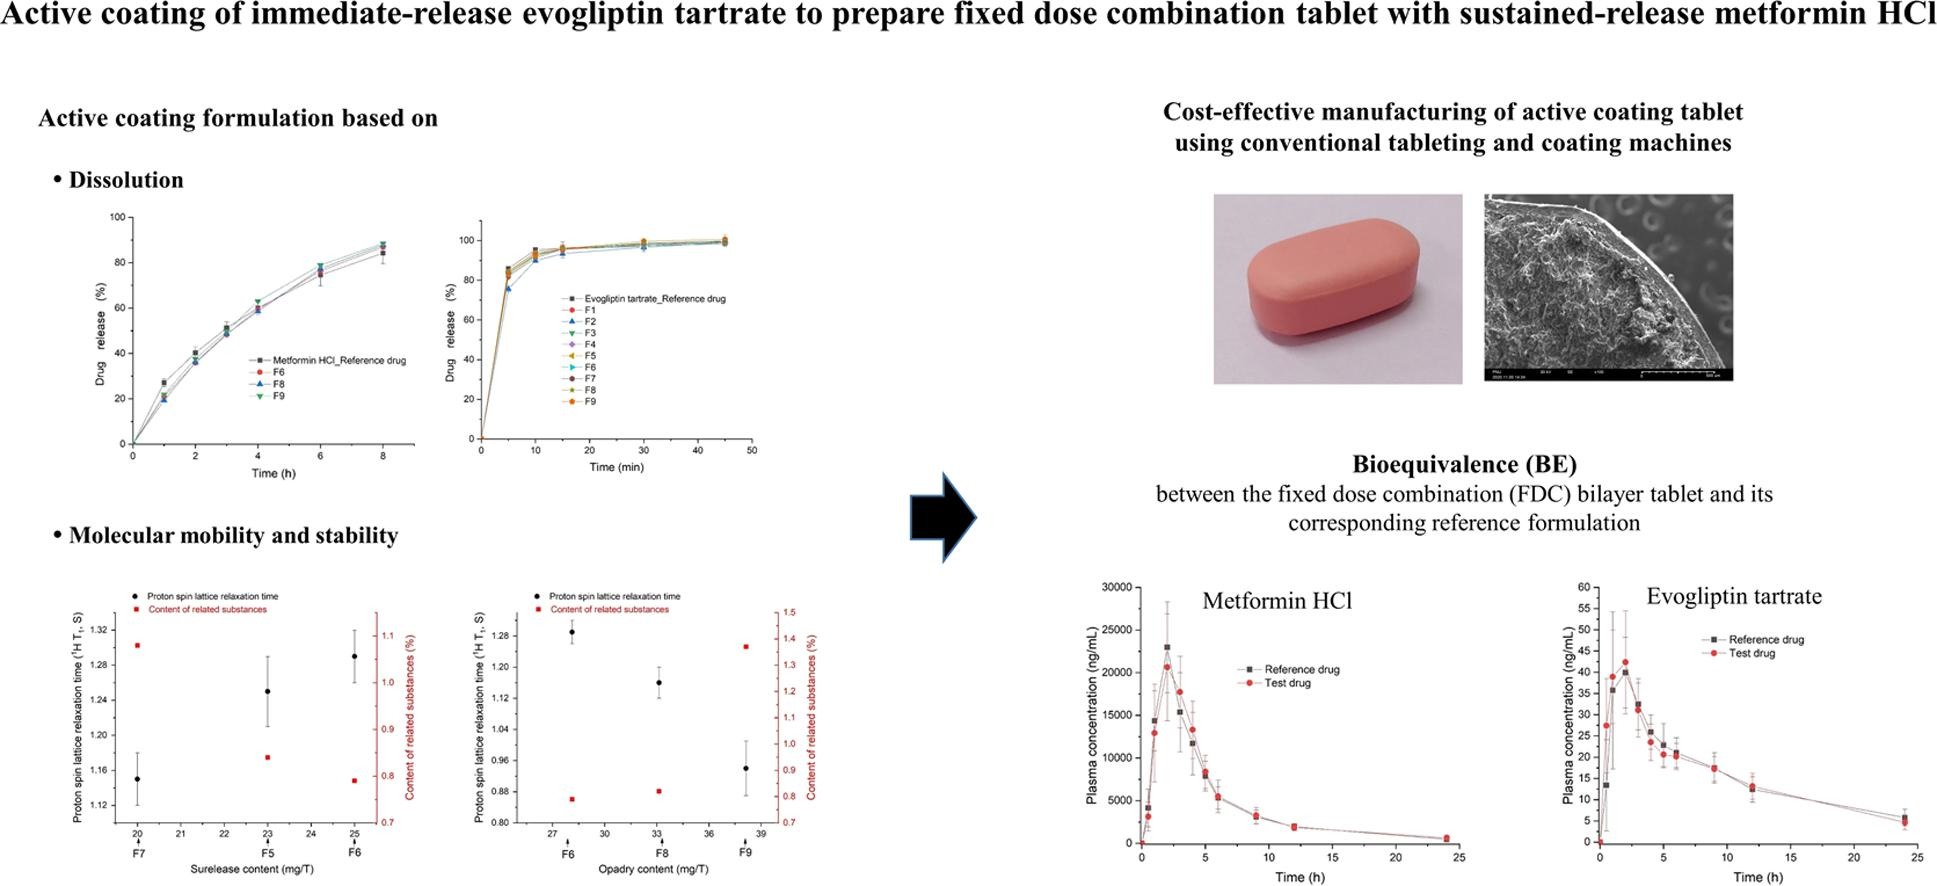 Active coating of immediate-release evogliptin tartrate to prepare fixed dose combination tablet with sustained-release metformin HCl